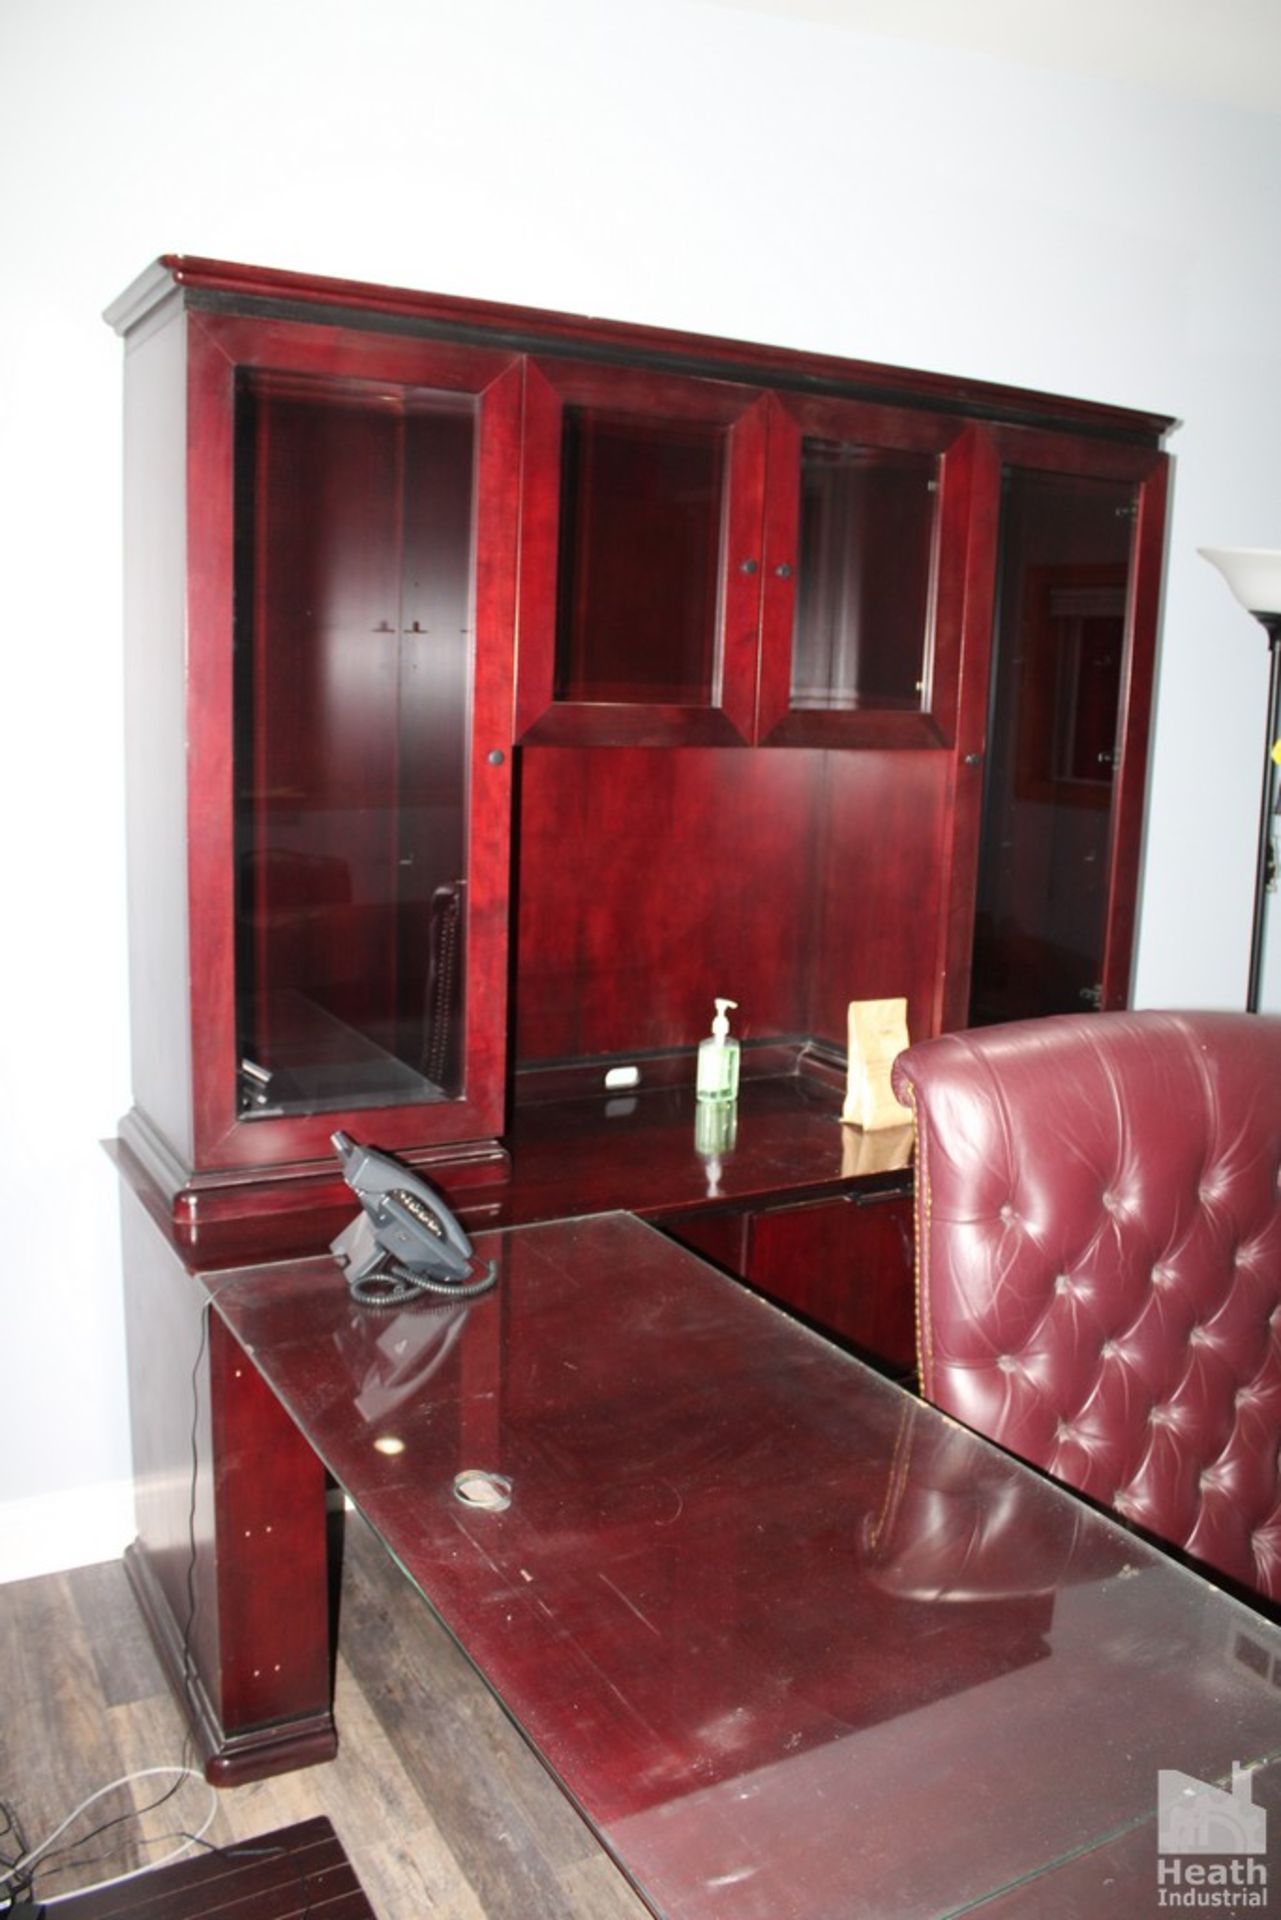 EXECUTIVE OFFICE WITH DESK, CREDENZA, CABINET, SHELF AND TWO CHAIRS - Image 3 of 4